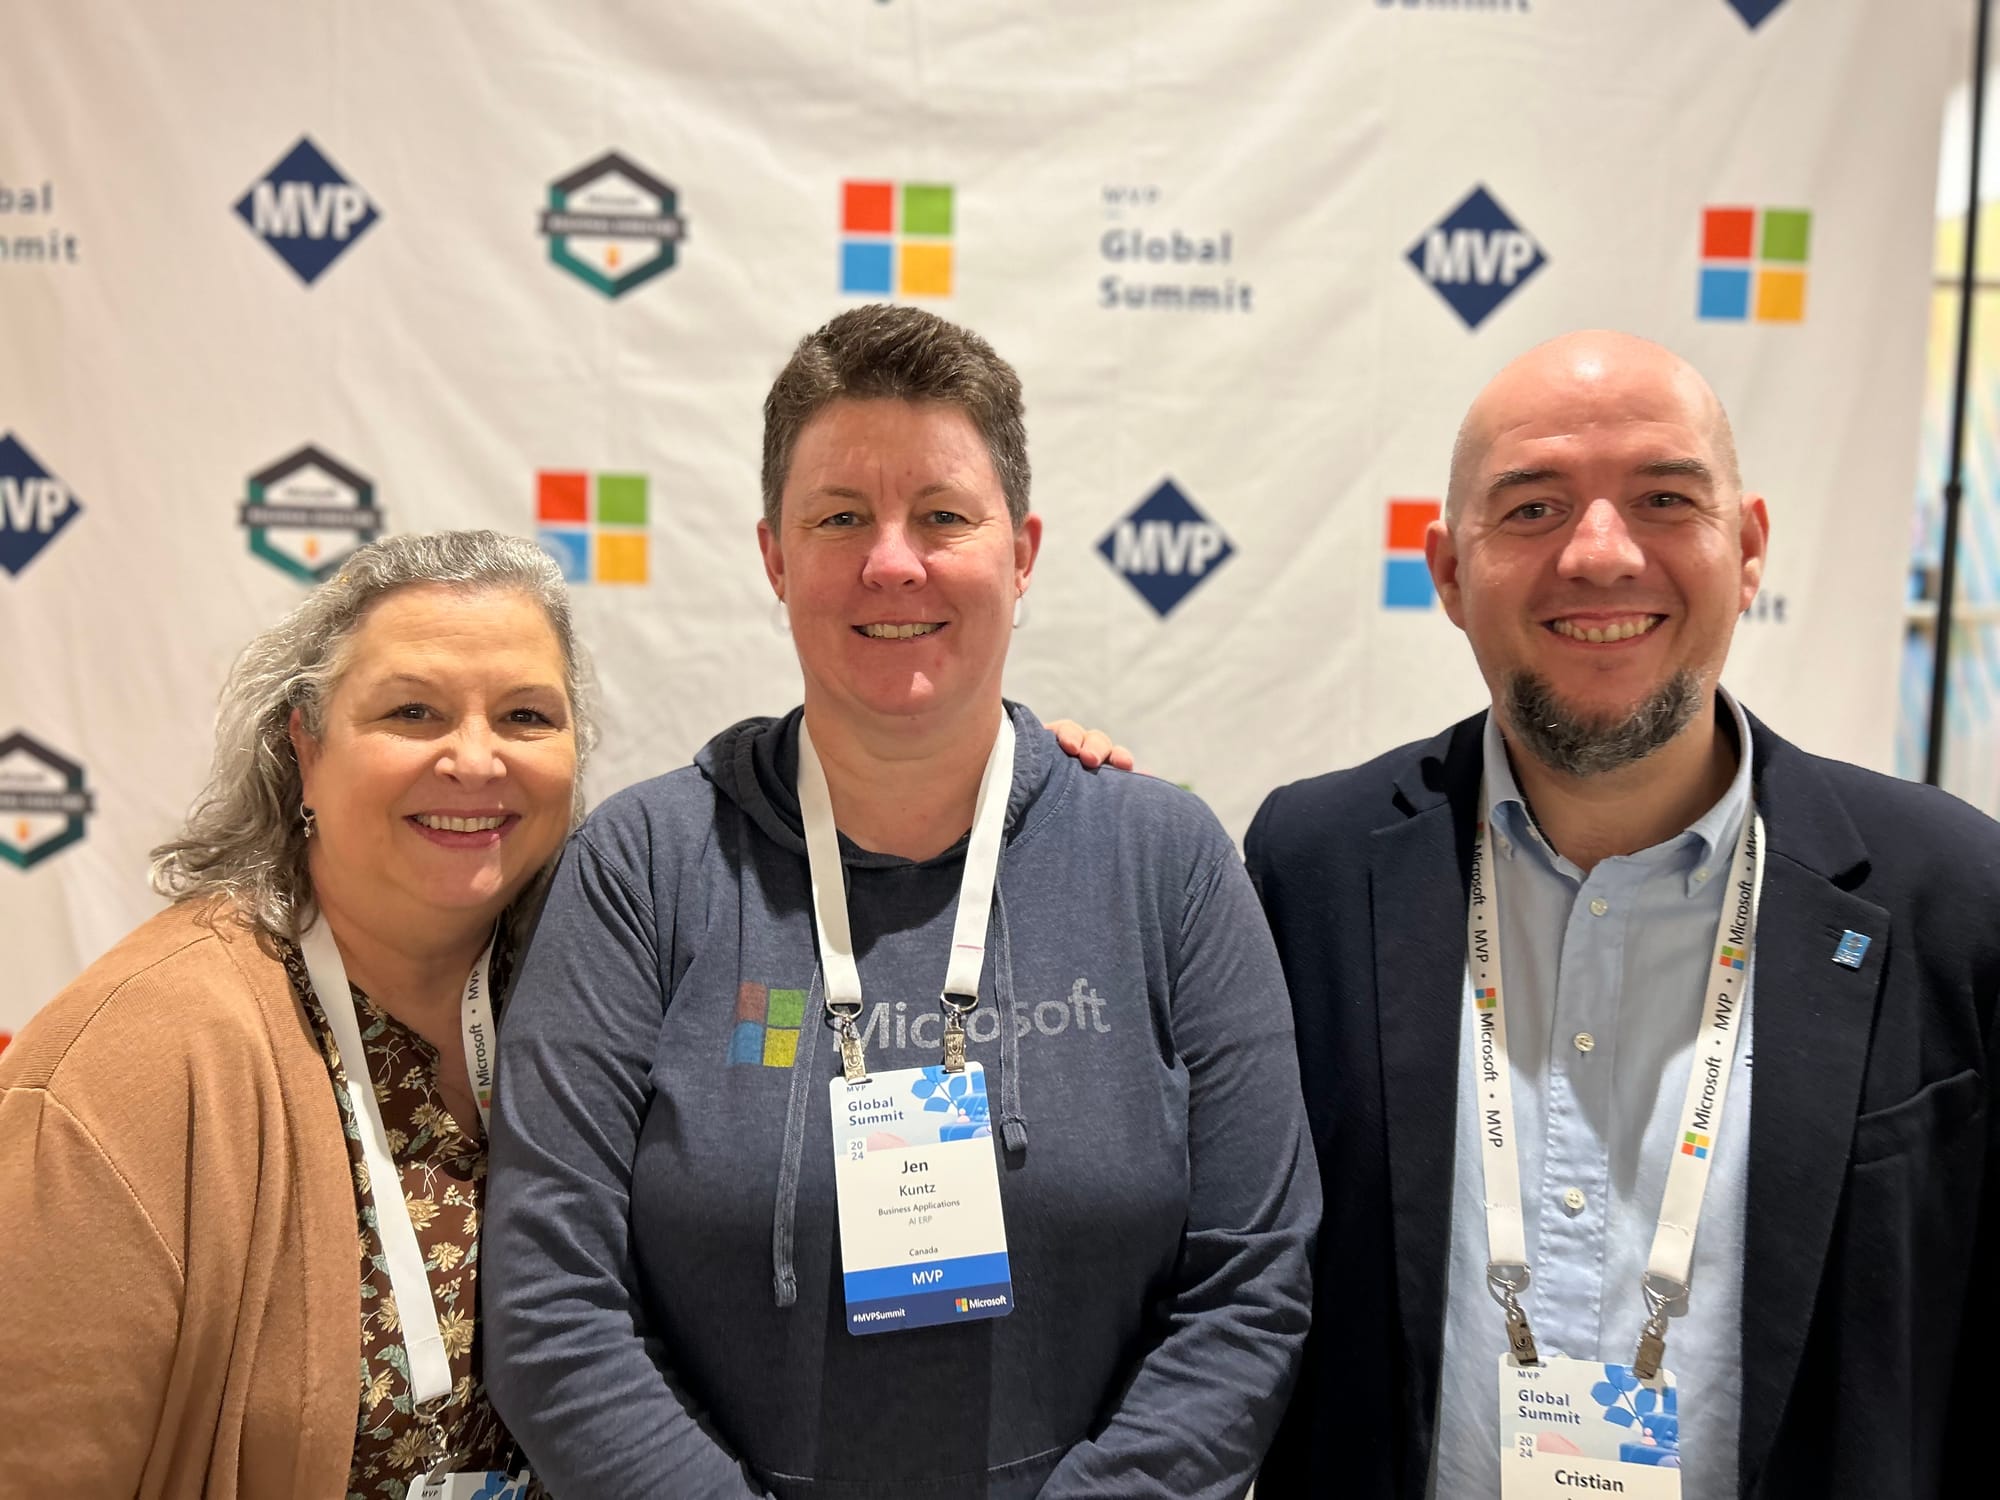 Belinda Allen, a smiling woman with long grey hair, wearing a light brown sweater over a dark brown floral shirt; Jen/me, with short brown hair, wearing a blue long sleeve hooded shirt with the Microsoft logo on the front and a lanyard around my neck; Cristian Angyal, with a shaved head and black goatee, wearing a light blue button down shirt underneath a dark blue blazer, with a lanyard around his neck.